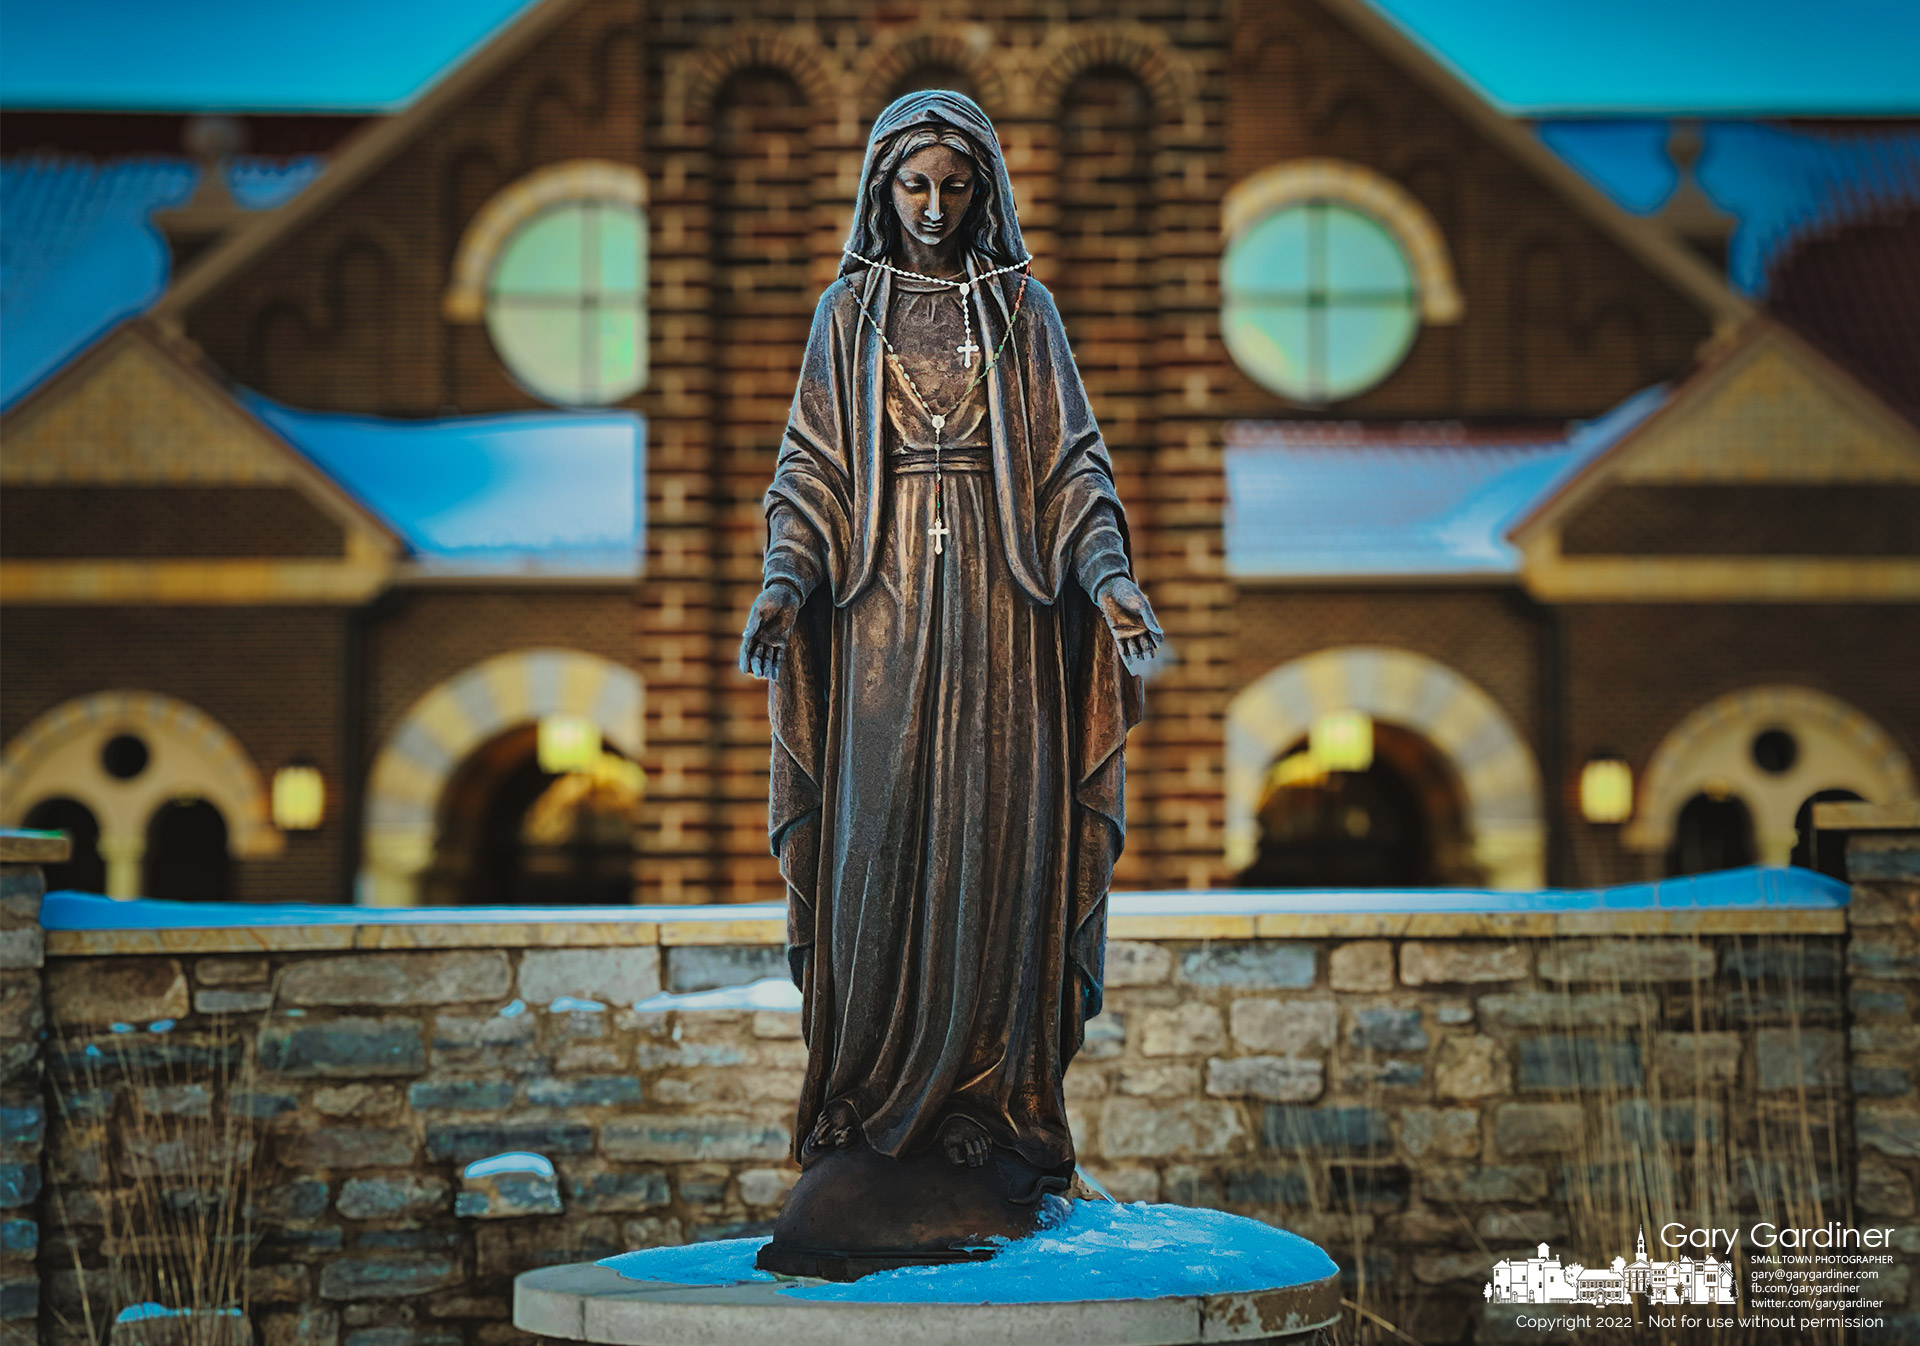 The statue of Mary wears a pair of rosaries and a layer of frost just minutes after sunrise on Sunday morning before the first Mass. My Final Photo for February 6, 2022.